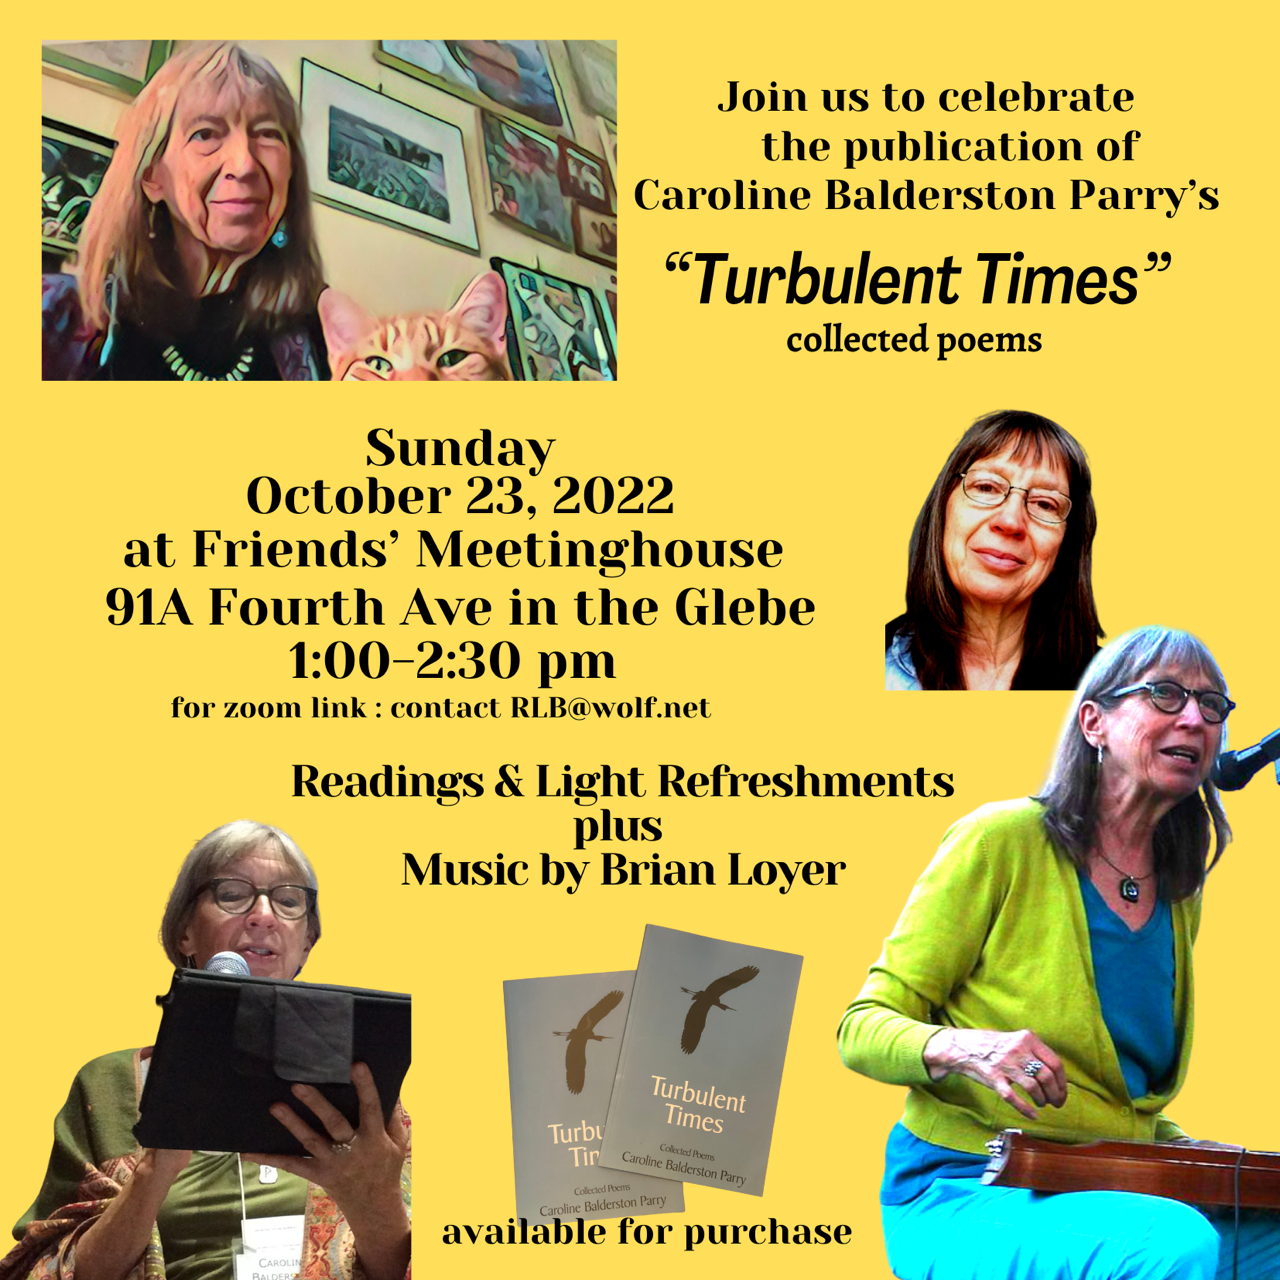 Join us to celebrate the publication of Caroline Balderston Parry's 'Turbulent Times' collected poems. Sunday, Oct. 23, 2022 at Friends' Meetinghouse 91A Fourth Ave in the Glebe, 1-2:30pm. For Zoom link, contact RLB@wolf.net. Readings & light refreshments plus music by Brian Loyer. 